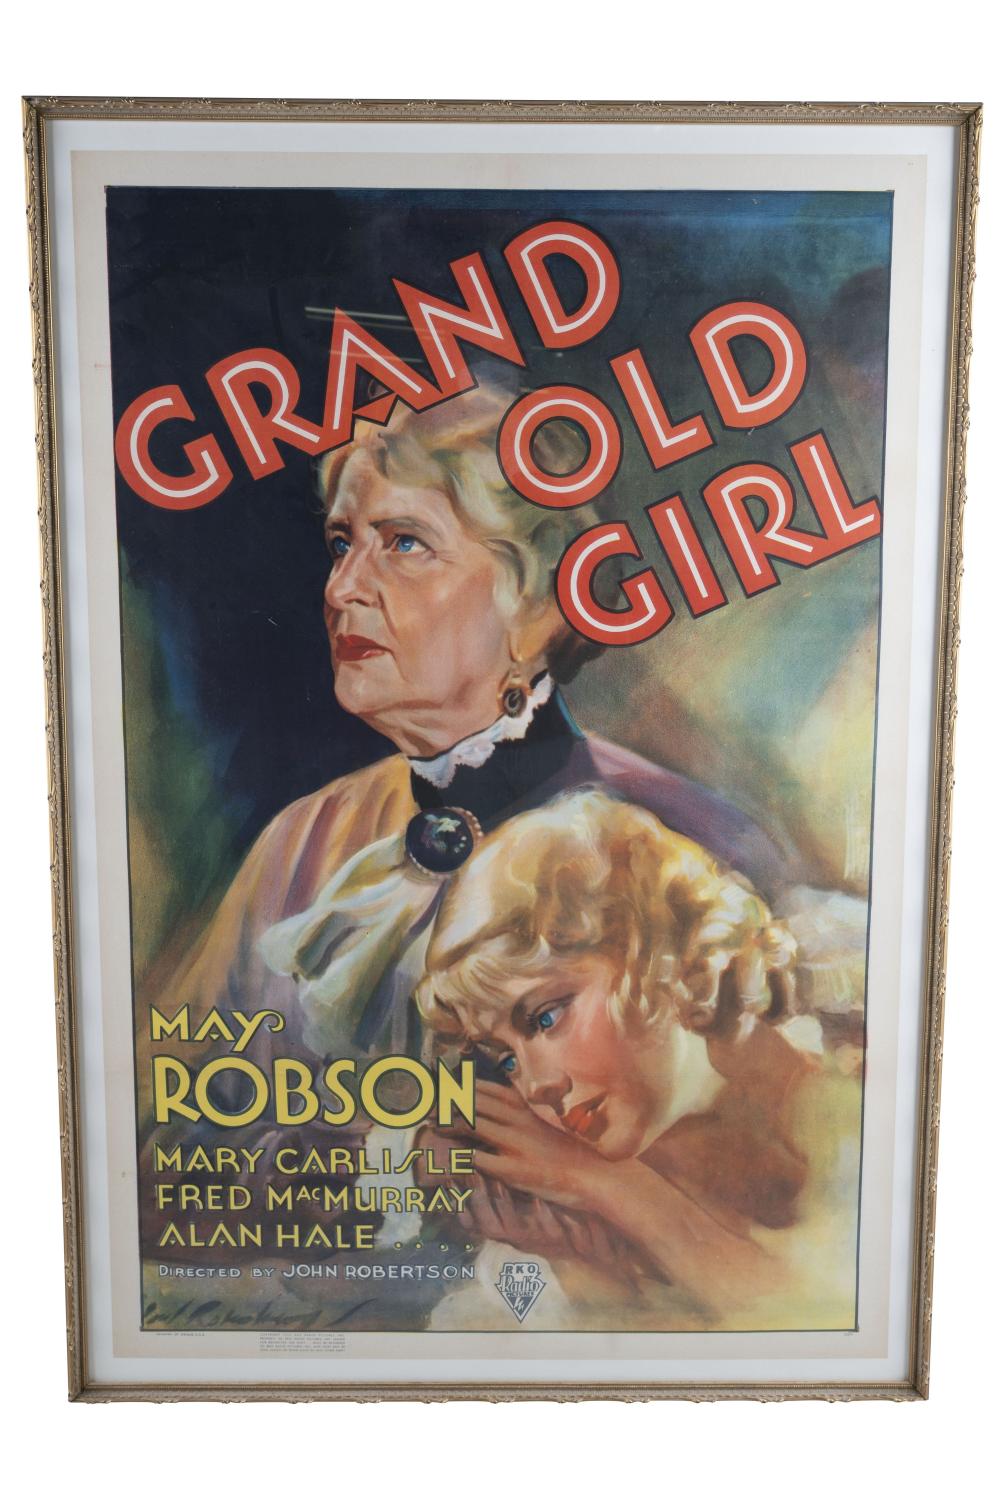 GRAND OLD GIRL FILM POSTERwith May Robson,